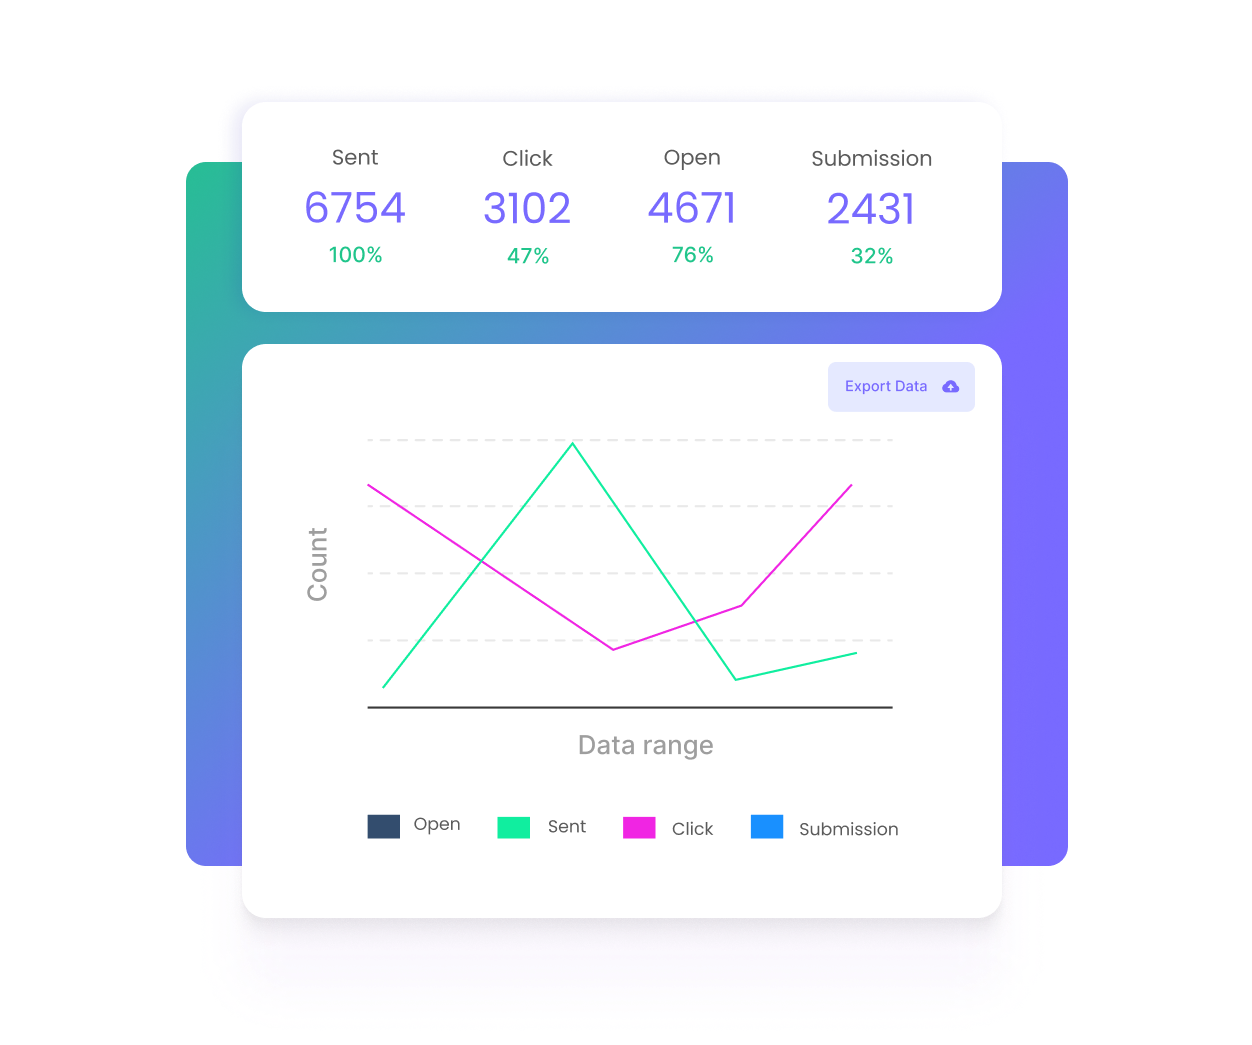 Mailmodo has an interactive dashboard to track down emails and campaigns which you can make with drag and drop operations including the latest feature of Spin the Wheel.